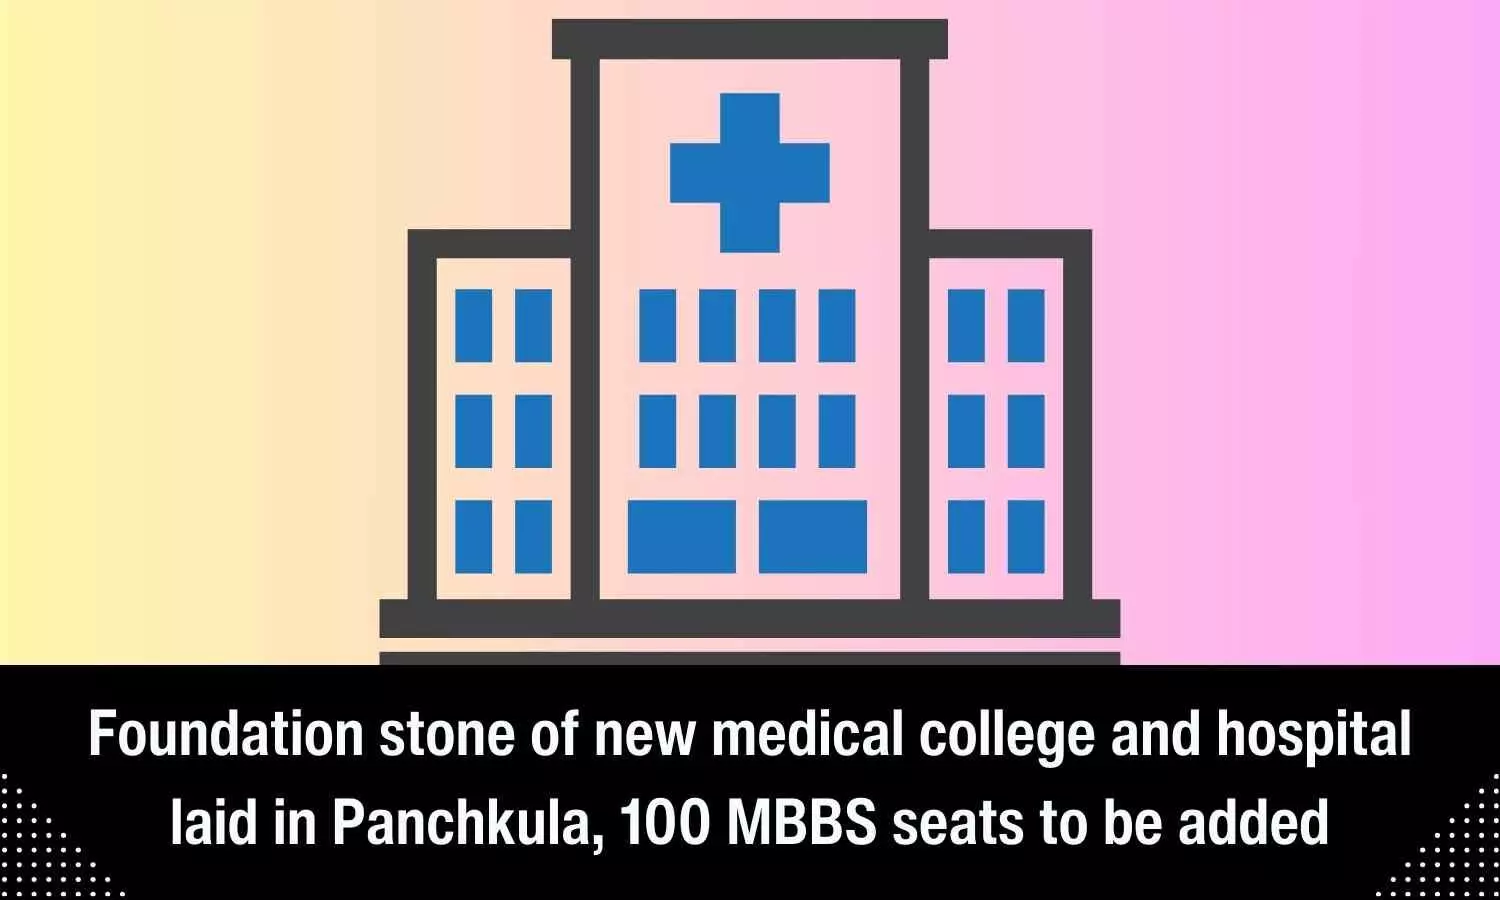 Haryana CM lays foundation stone of new medical college, hospital in Panchkula